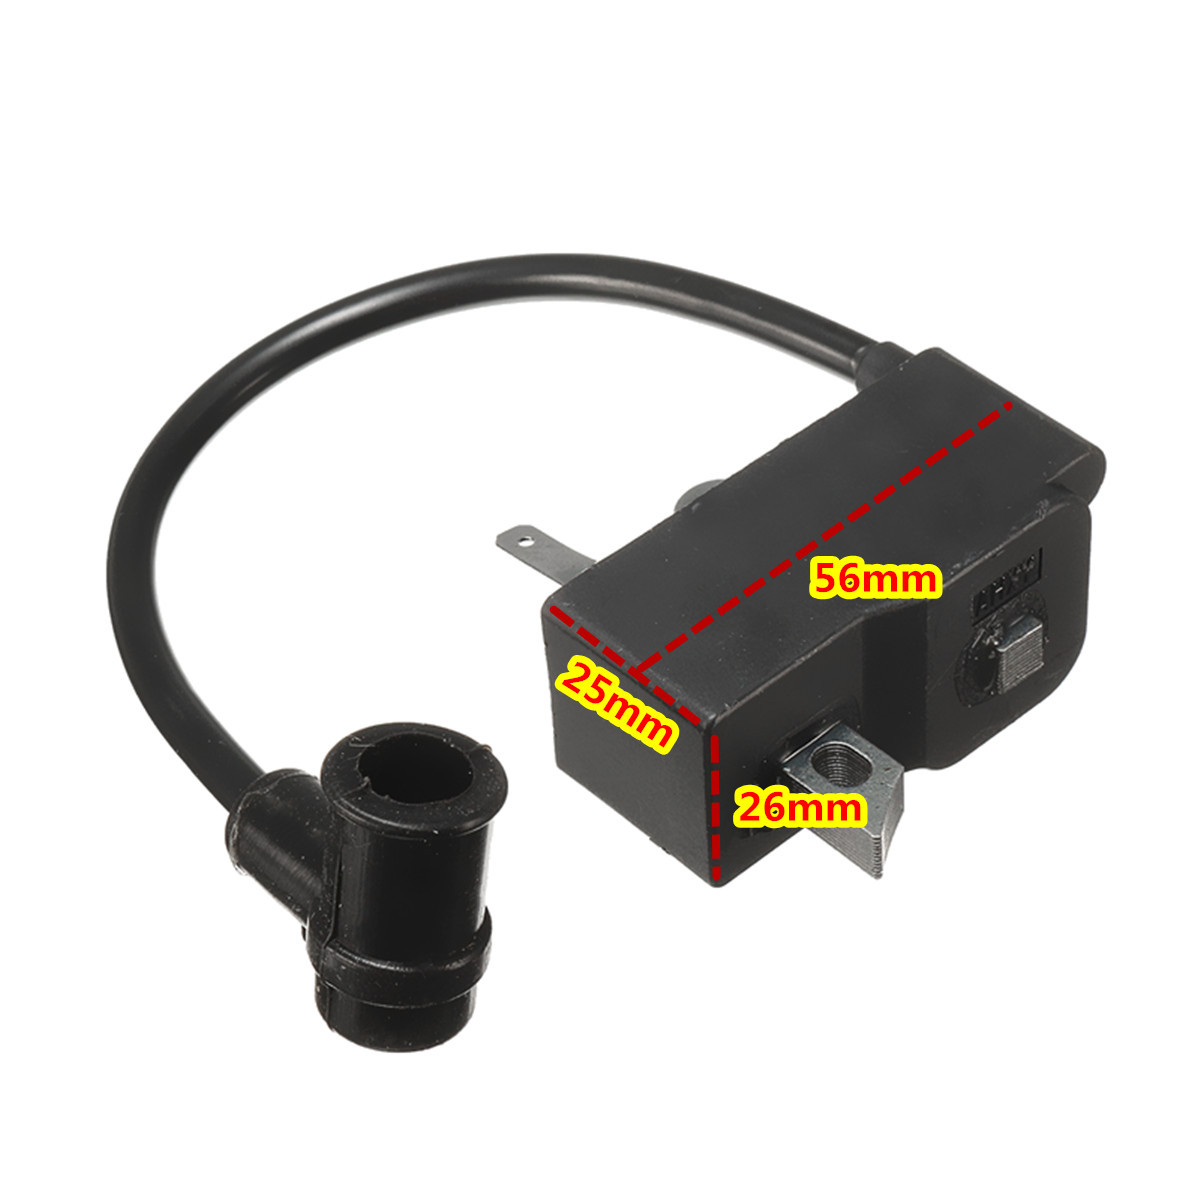 Gardening-Chain-Saw-Ignition-Coil-Spark-Plug-Replacement-for-Stihl-FS75-FS80-FS85-1085917-9